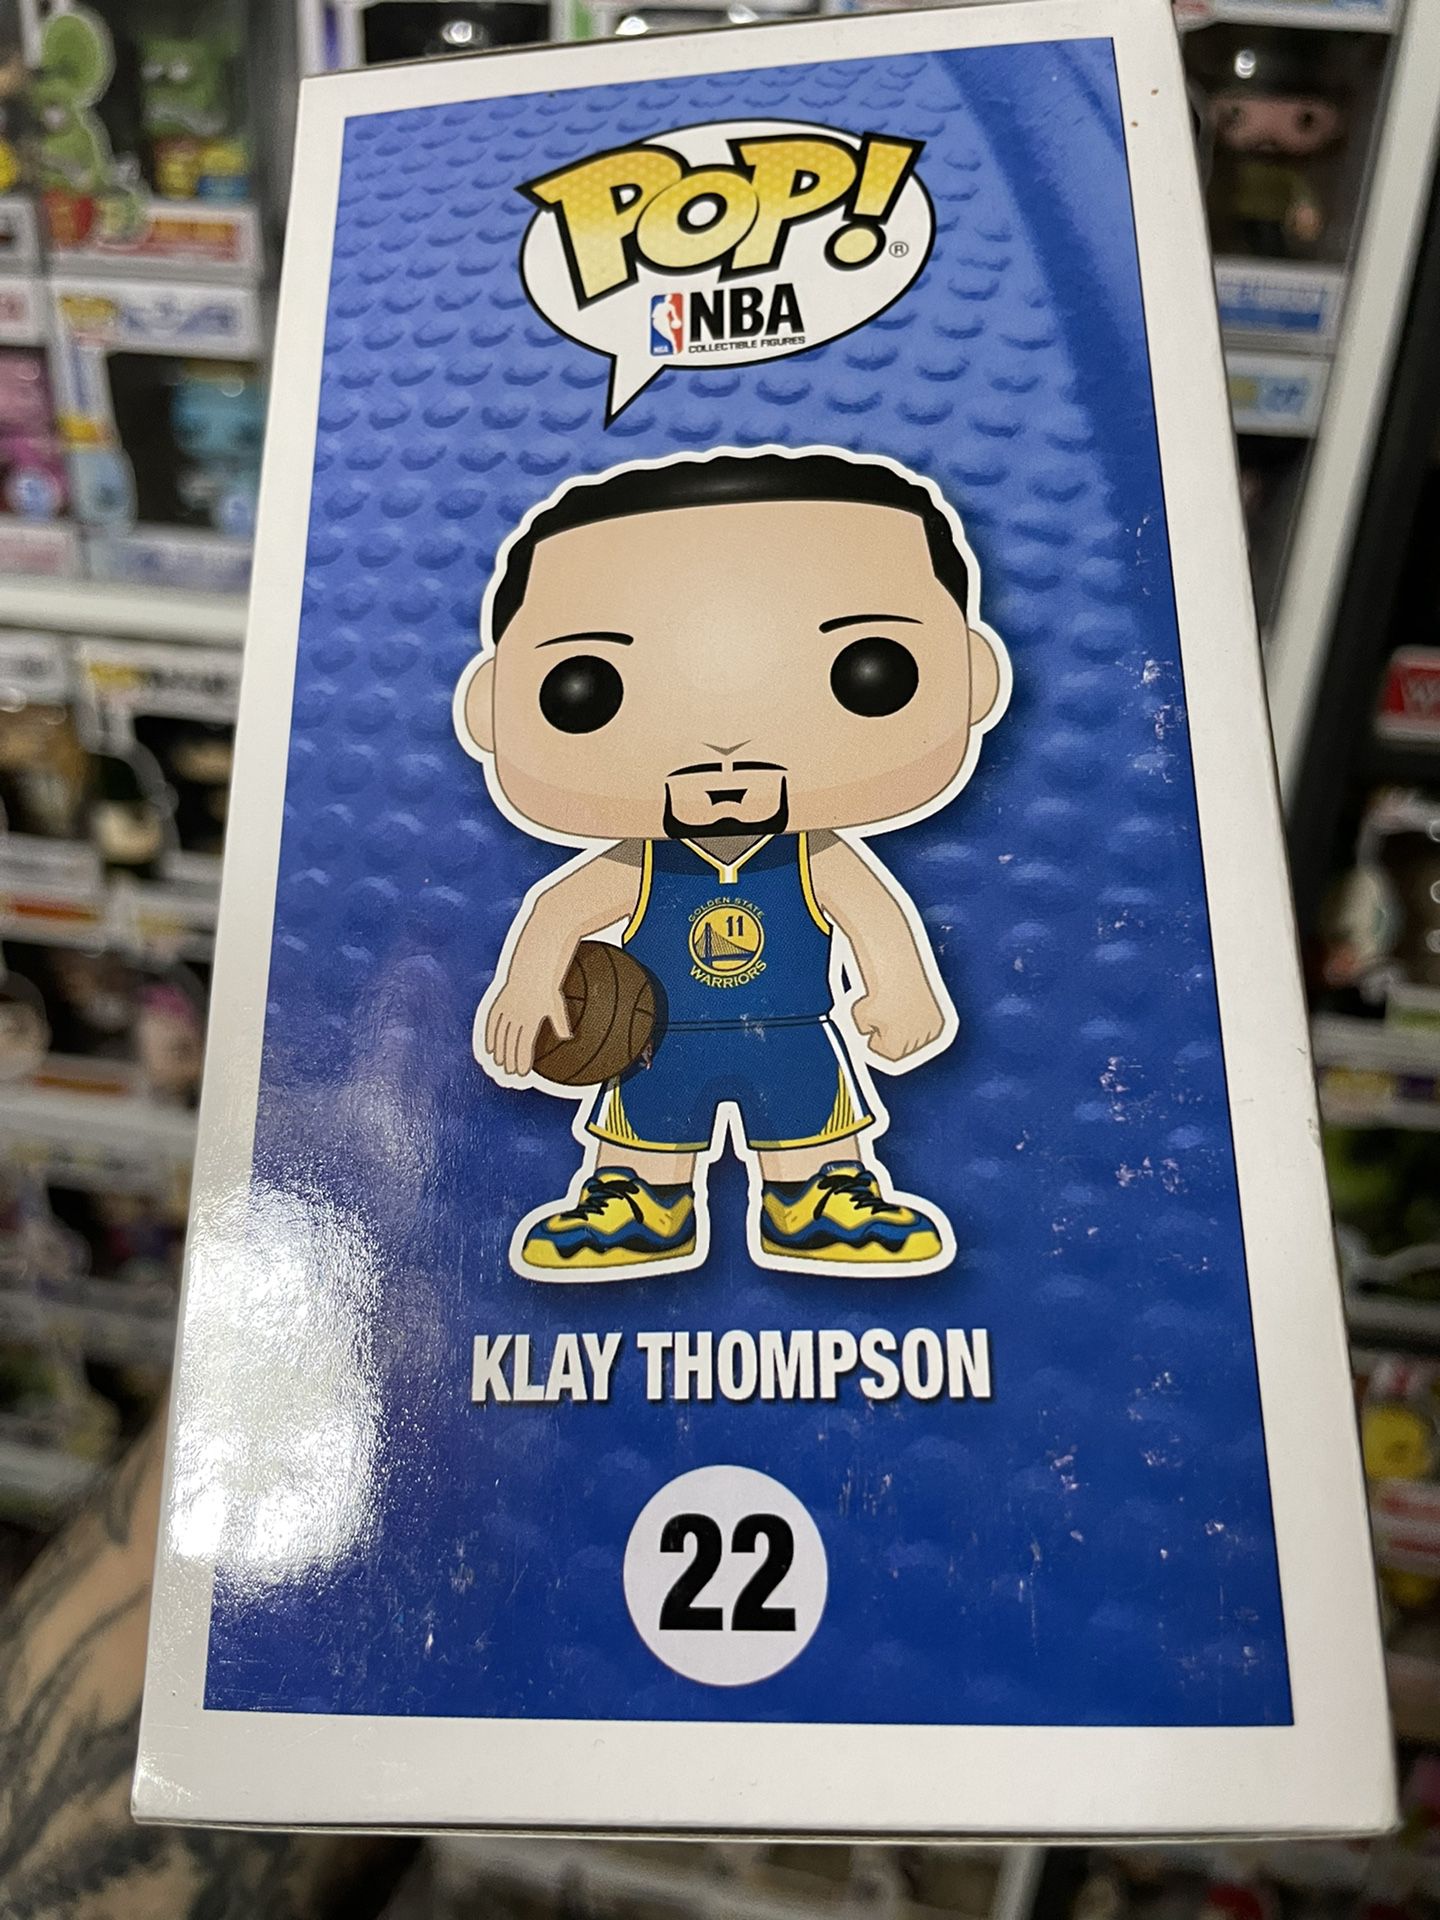 Klay Thompson And Jimmy Butler Funko Pop for Sale in North Las